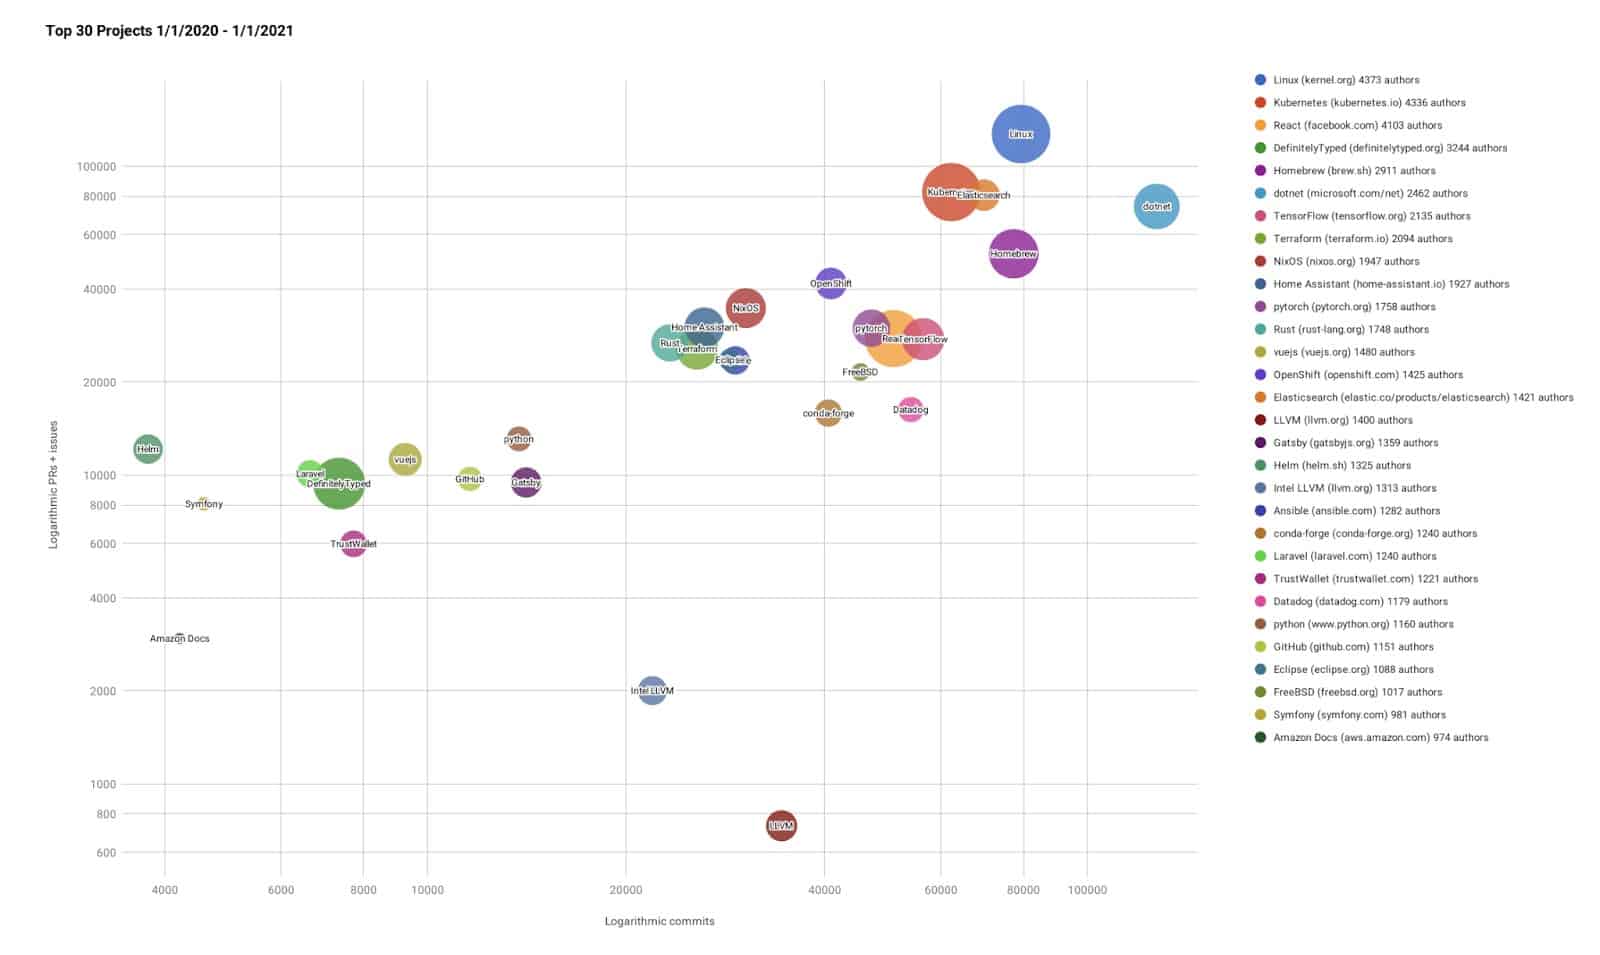 Diagram showing Logarithmic Commits of Top 30 GitHub Open Source projects 1/1/2020 - 1/1/2021